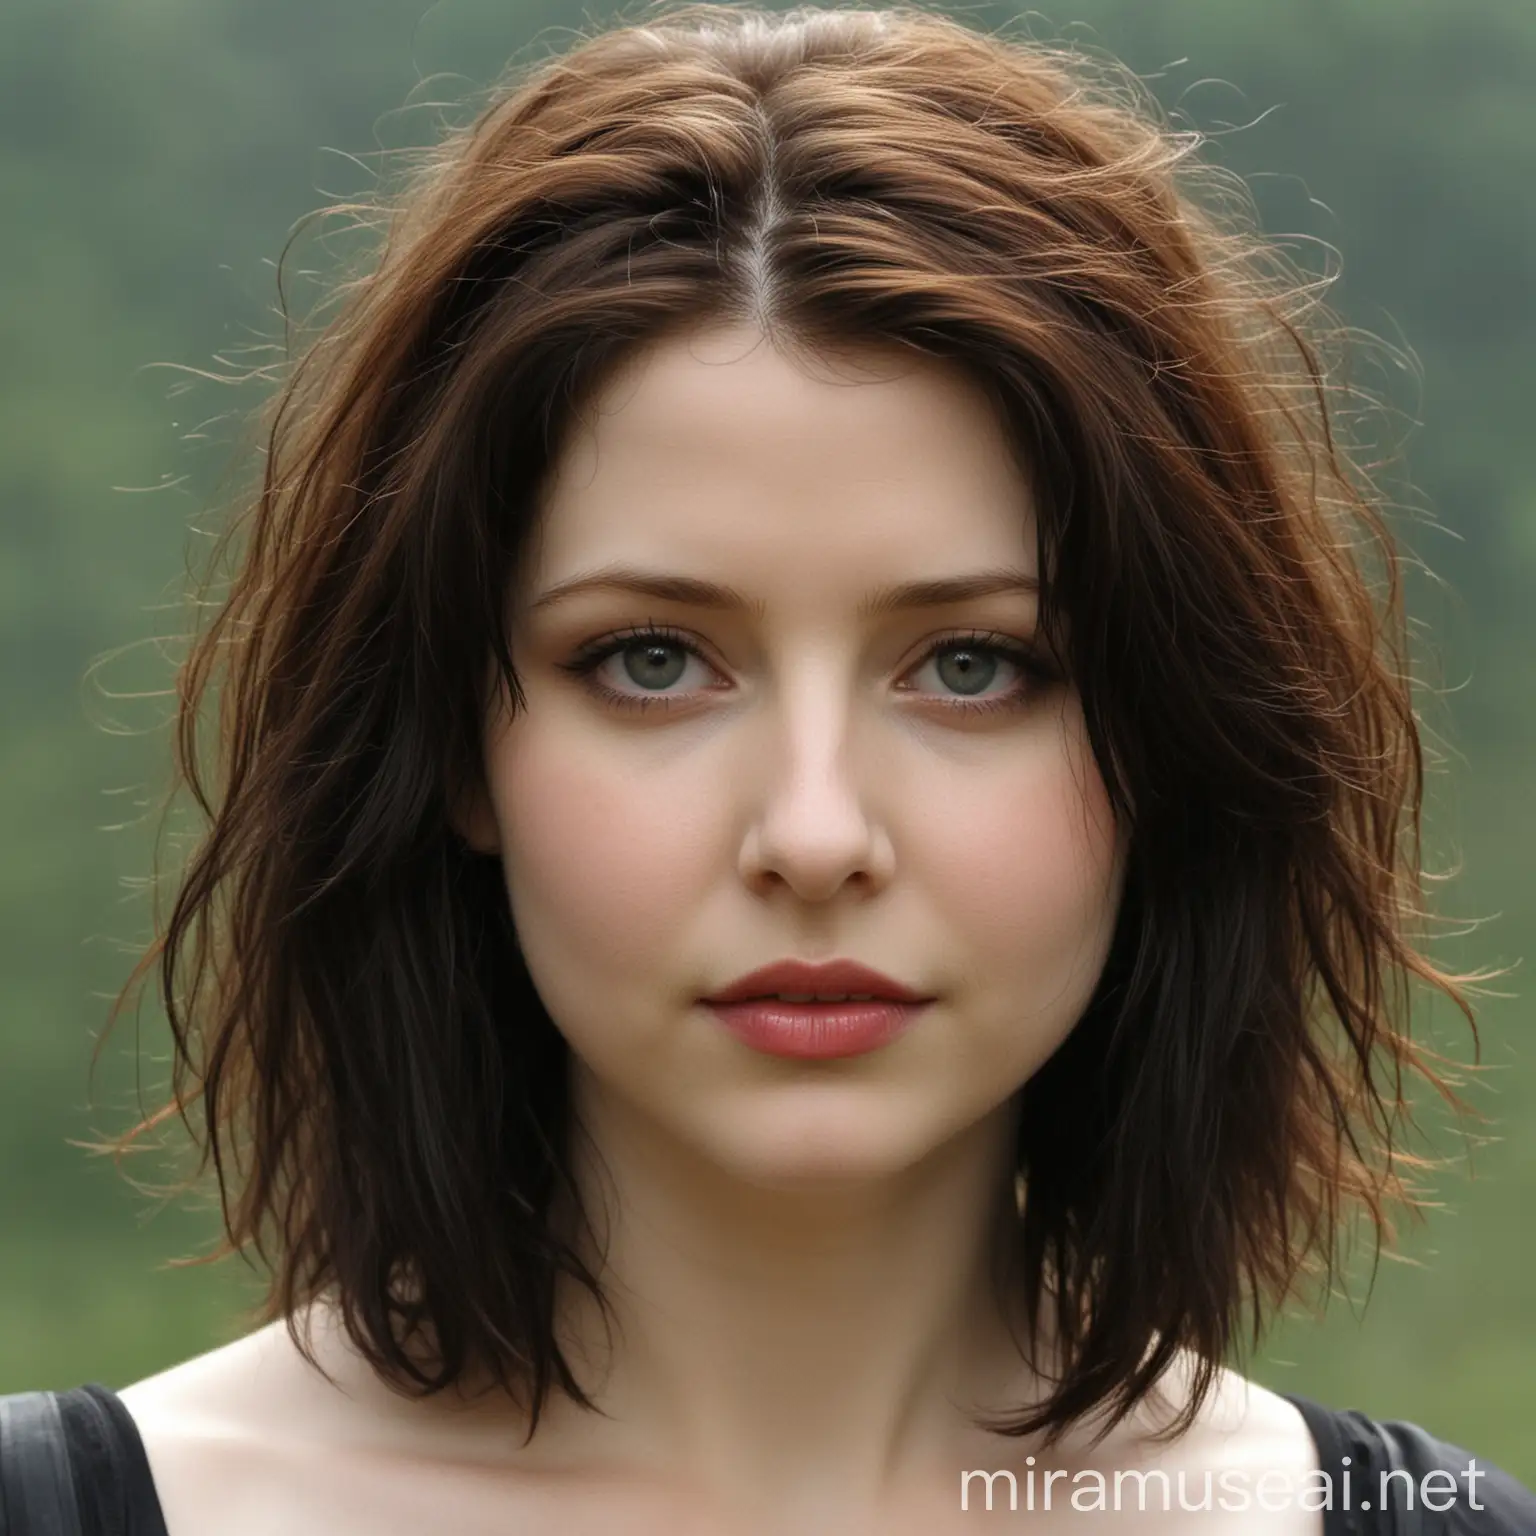 Rachel Hurd Wood with Rocker Look Portrait of a Woman with Light Eyes and Short Black Hair